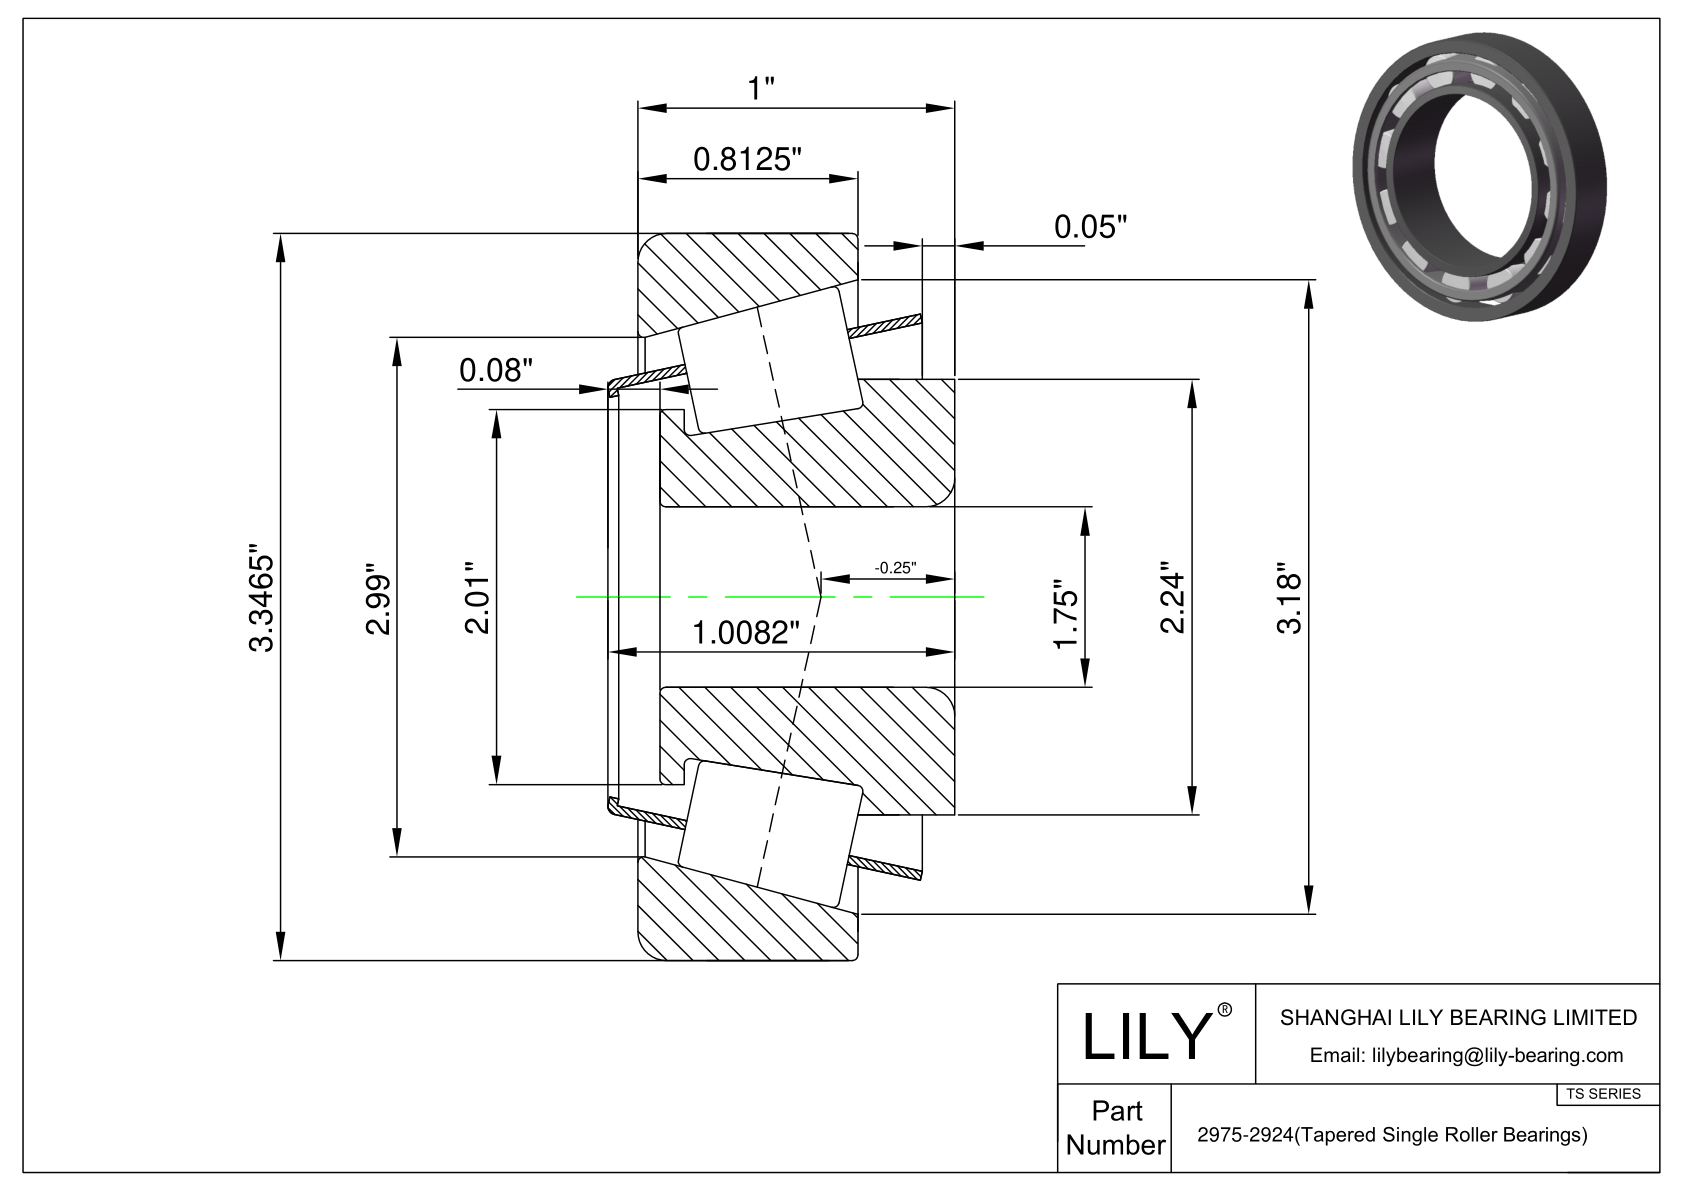 2975-2924 TS (Tapered Single Roller Bearings) (Imperial) cad drawing